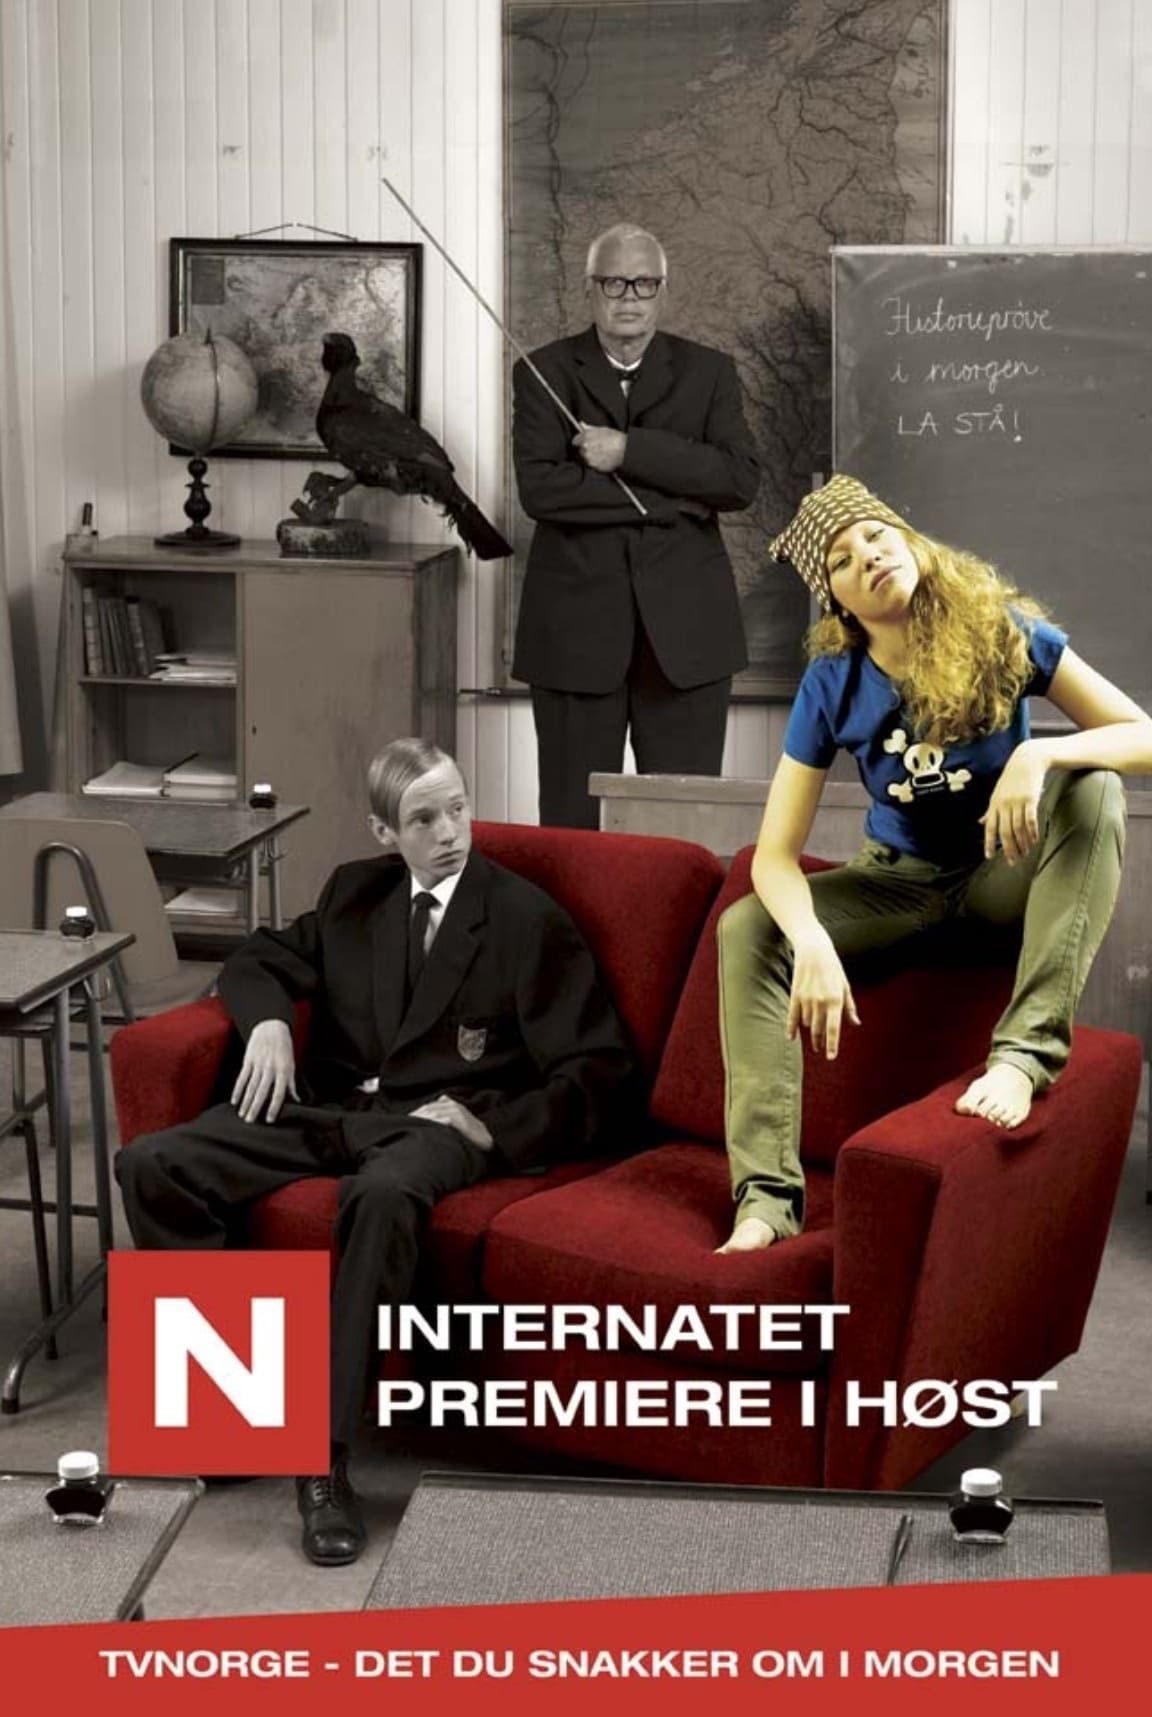 Internatet TV Shows About Youths